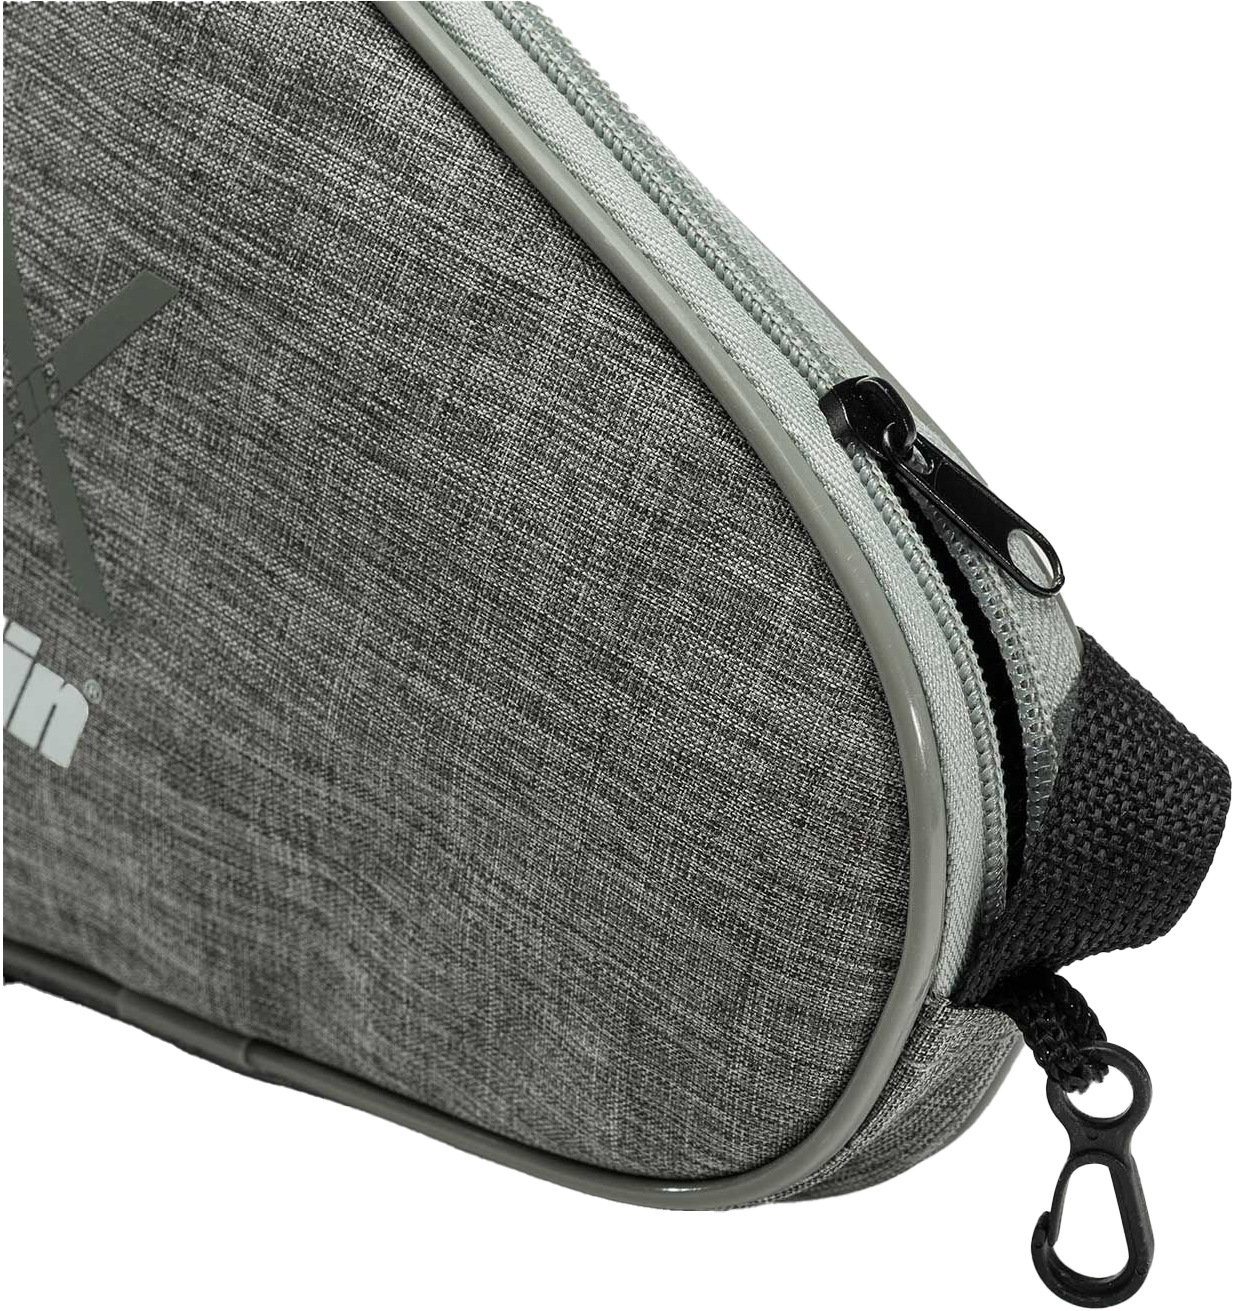 A gray Franklin pickleball paddle bag with a convenient carry strap and zipper.